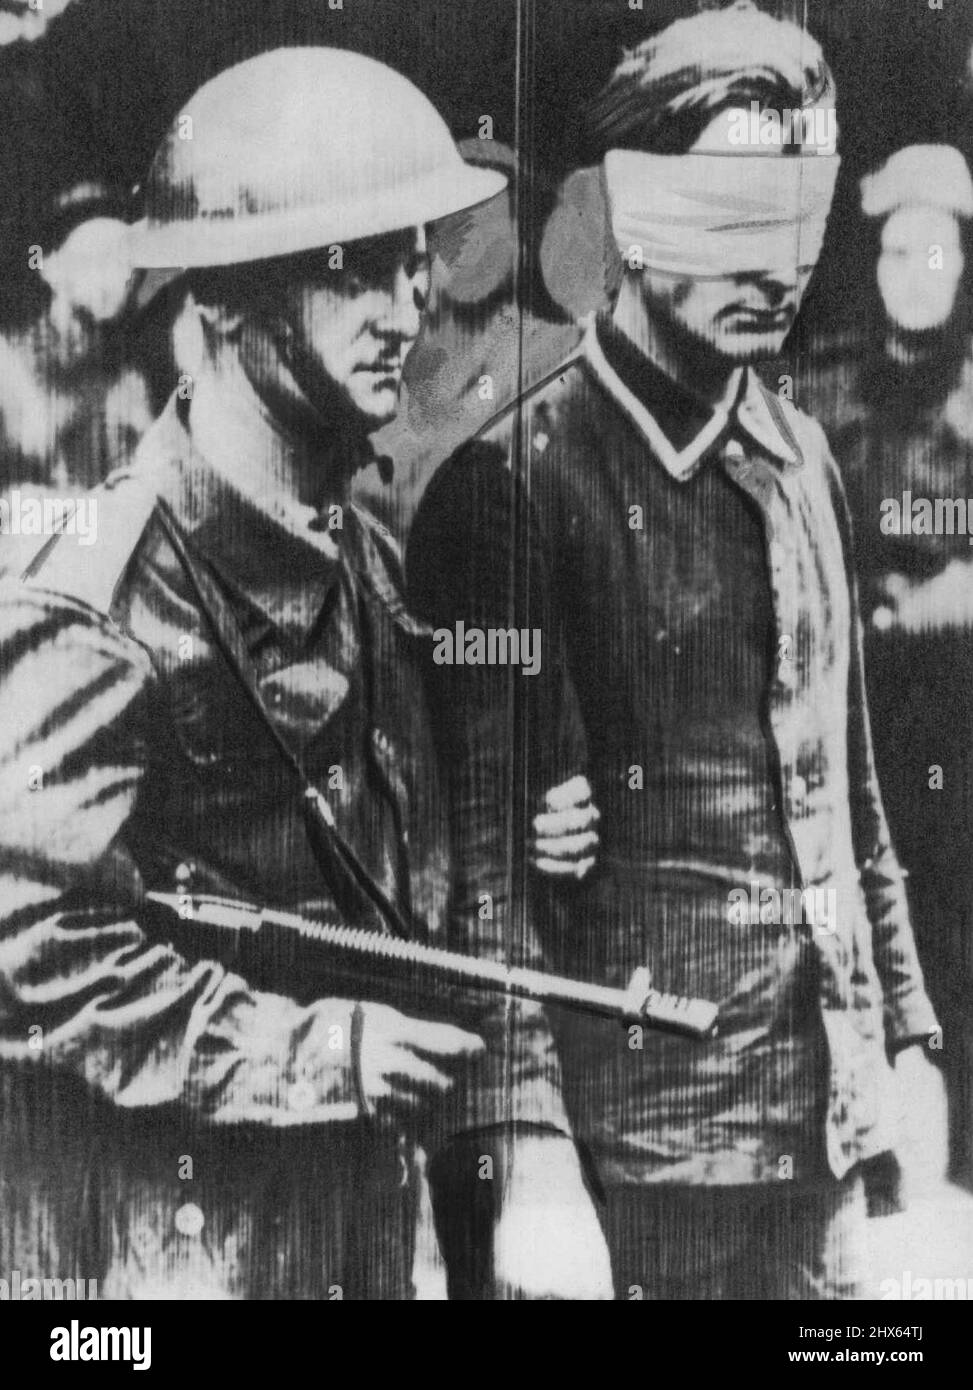 Commando Returns With Prisoner -- Back in Britain after the big Commando raid on Dieppe in German-occupied France, this stern Commando leads a blind-folded German prisoner. August 20, 1942 (Photo by AP Wirephoto). Stock Photo